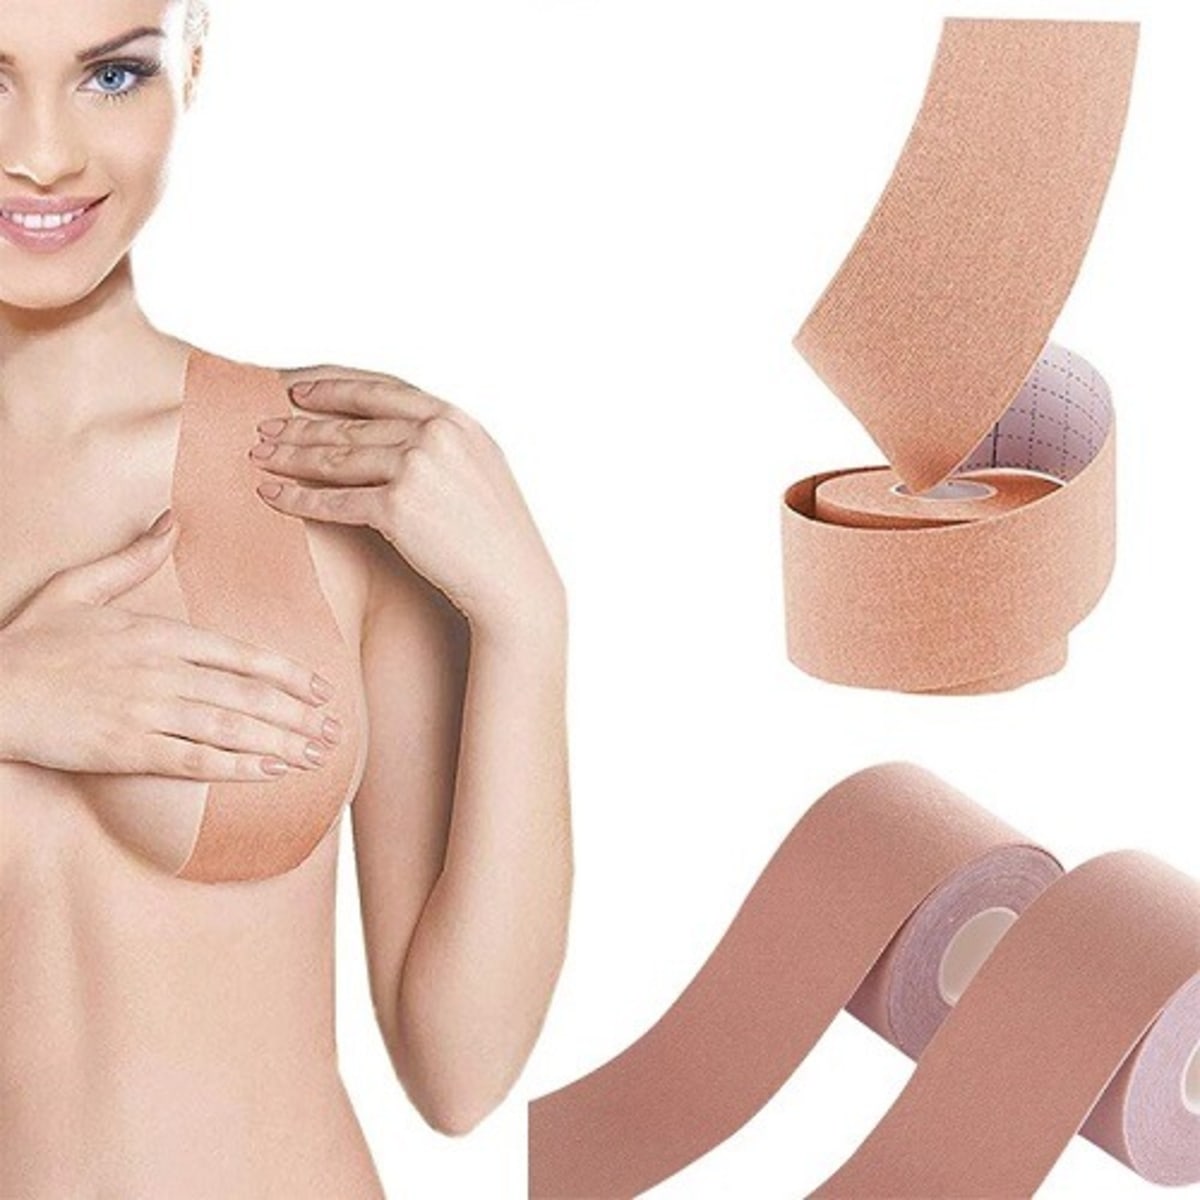 Boob Tape Strap - 5M, Shop Today. Get it Tomorrow!